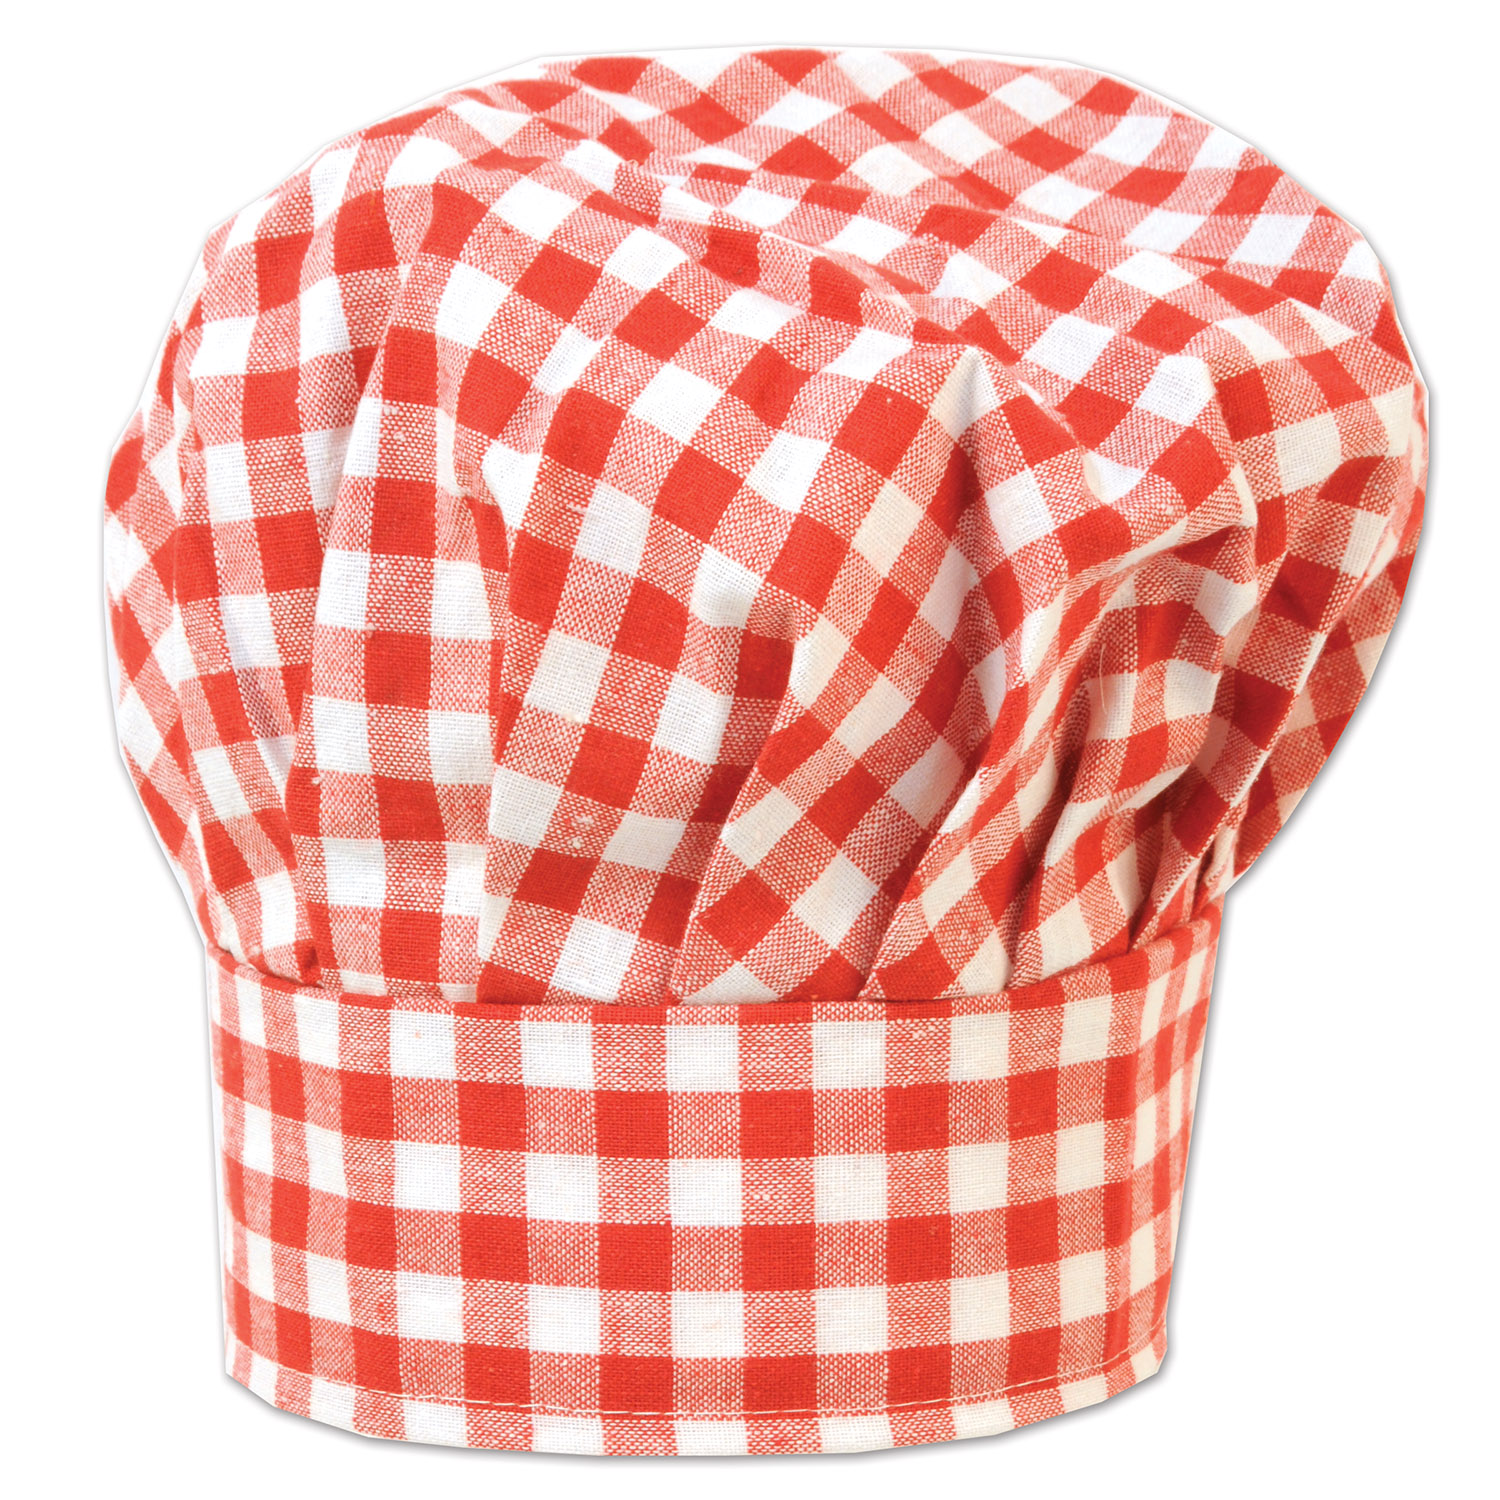 12 Pieces of Gingham Fabric Chef's Hat